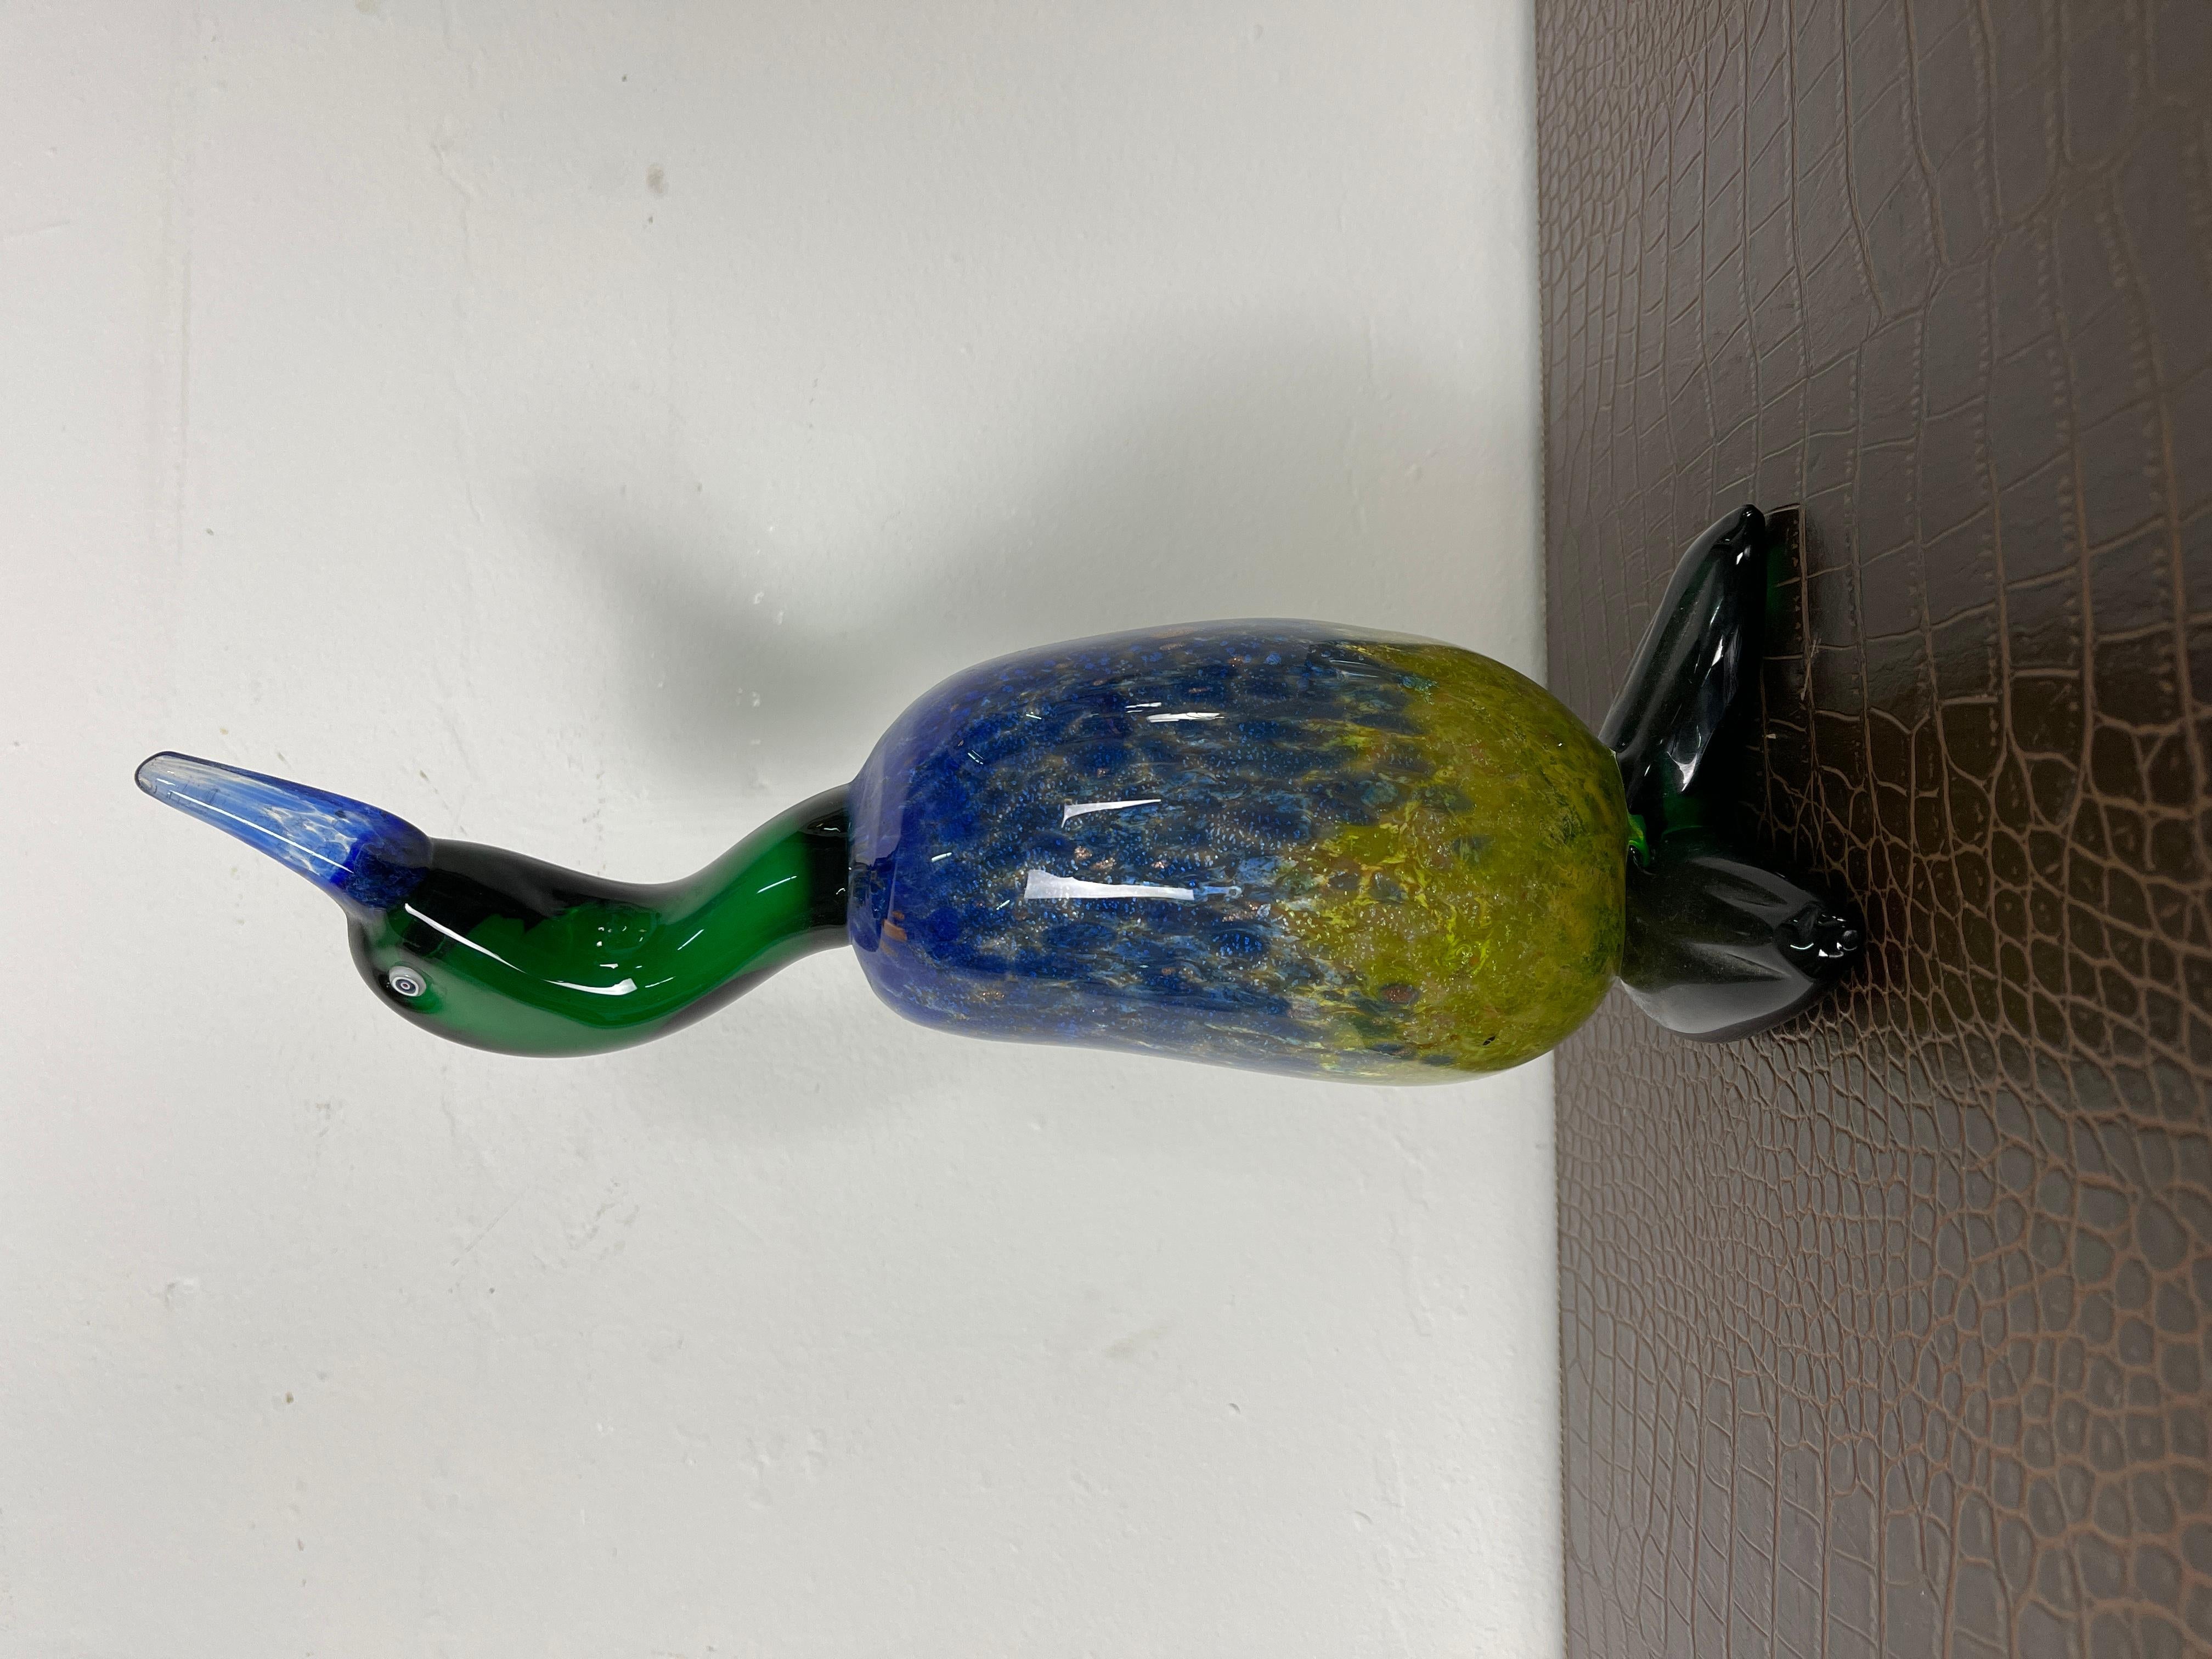 Murano glass duck by the master glassmaker Franco Moretti, available in 2 colors.